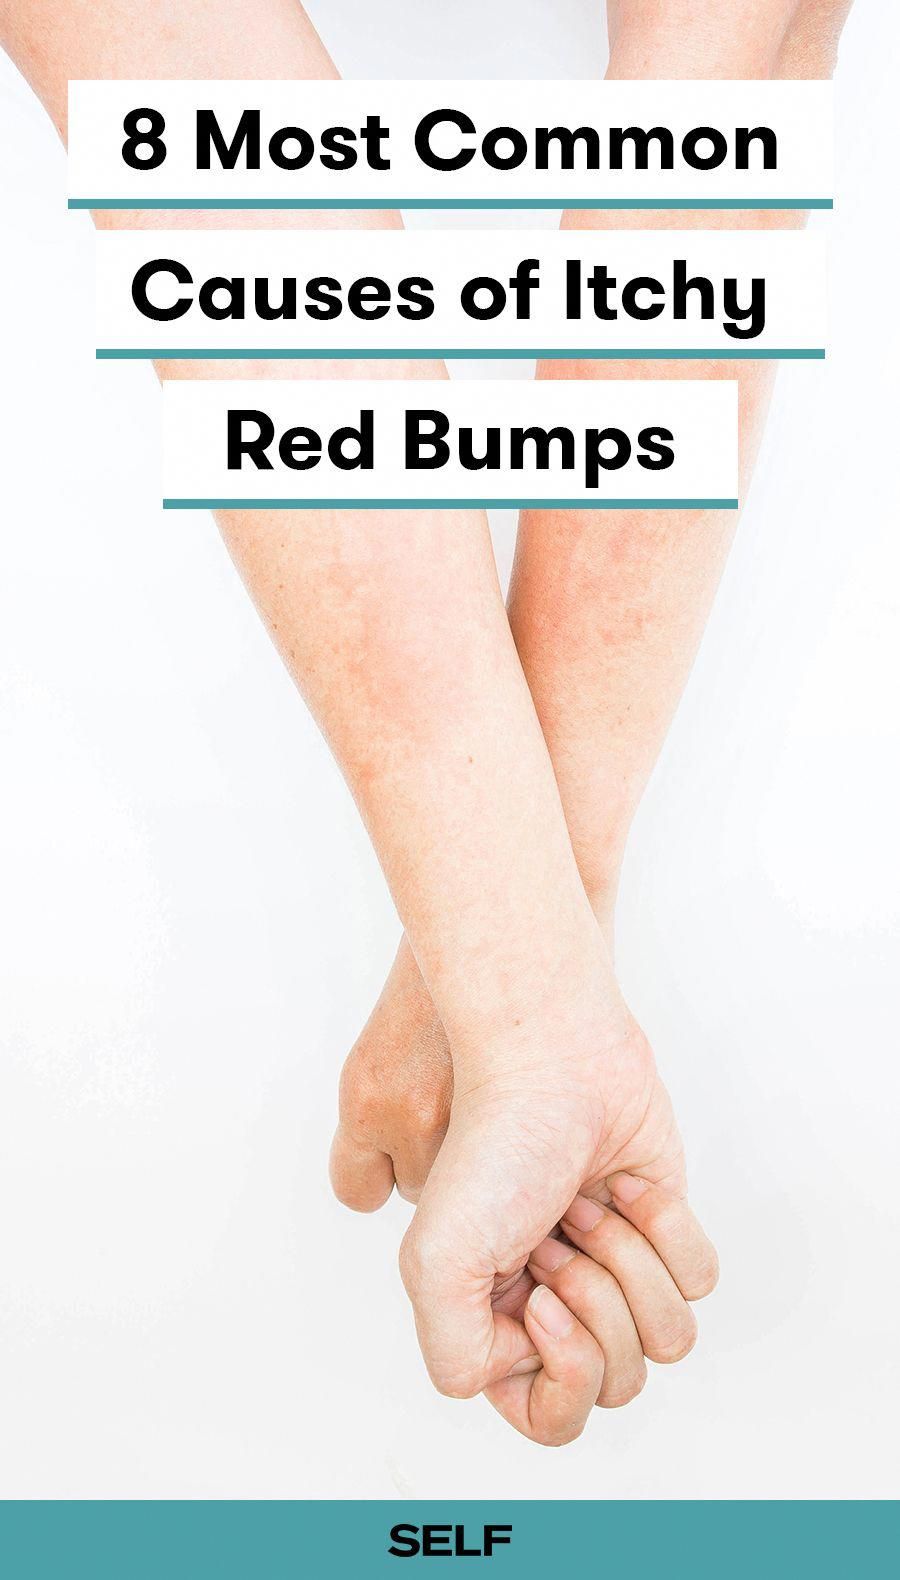 10 Common Causes of Itchy, Red Bumps and Skin Rashes ...